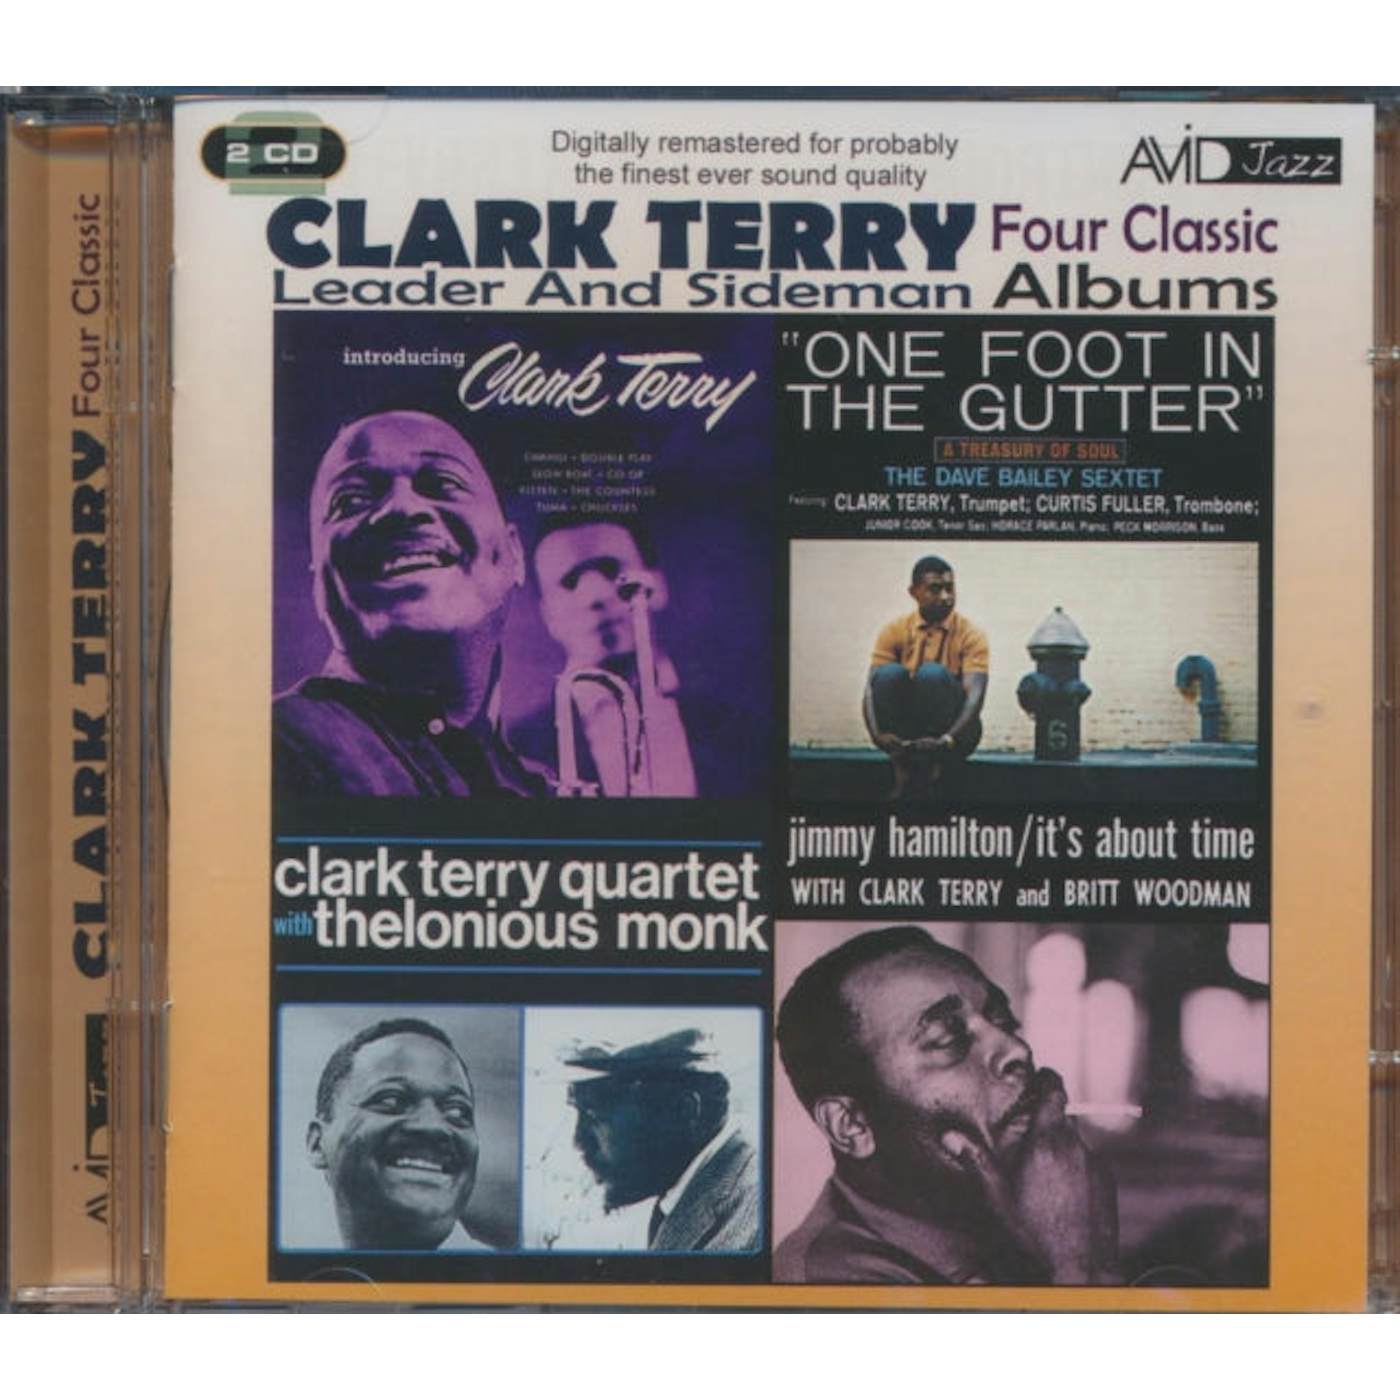 Clark Terry CD - Four Classic Albums (Introducing Clark Terry / One Foot In The Gutter / Clark Terry Quartet With Thelonious Monk / It's About Time)